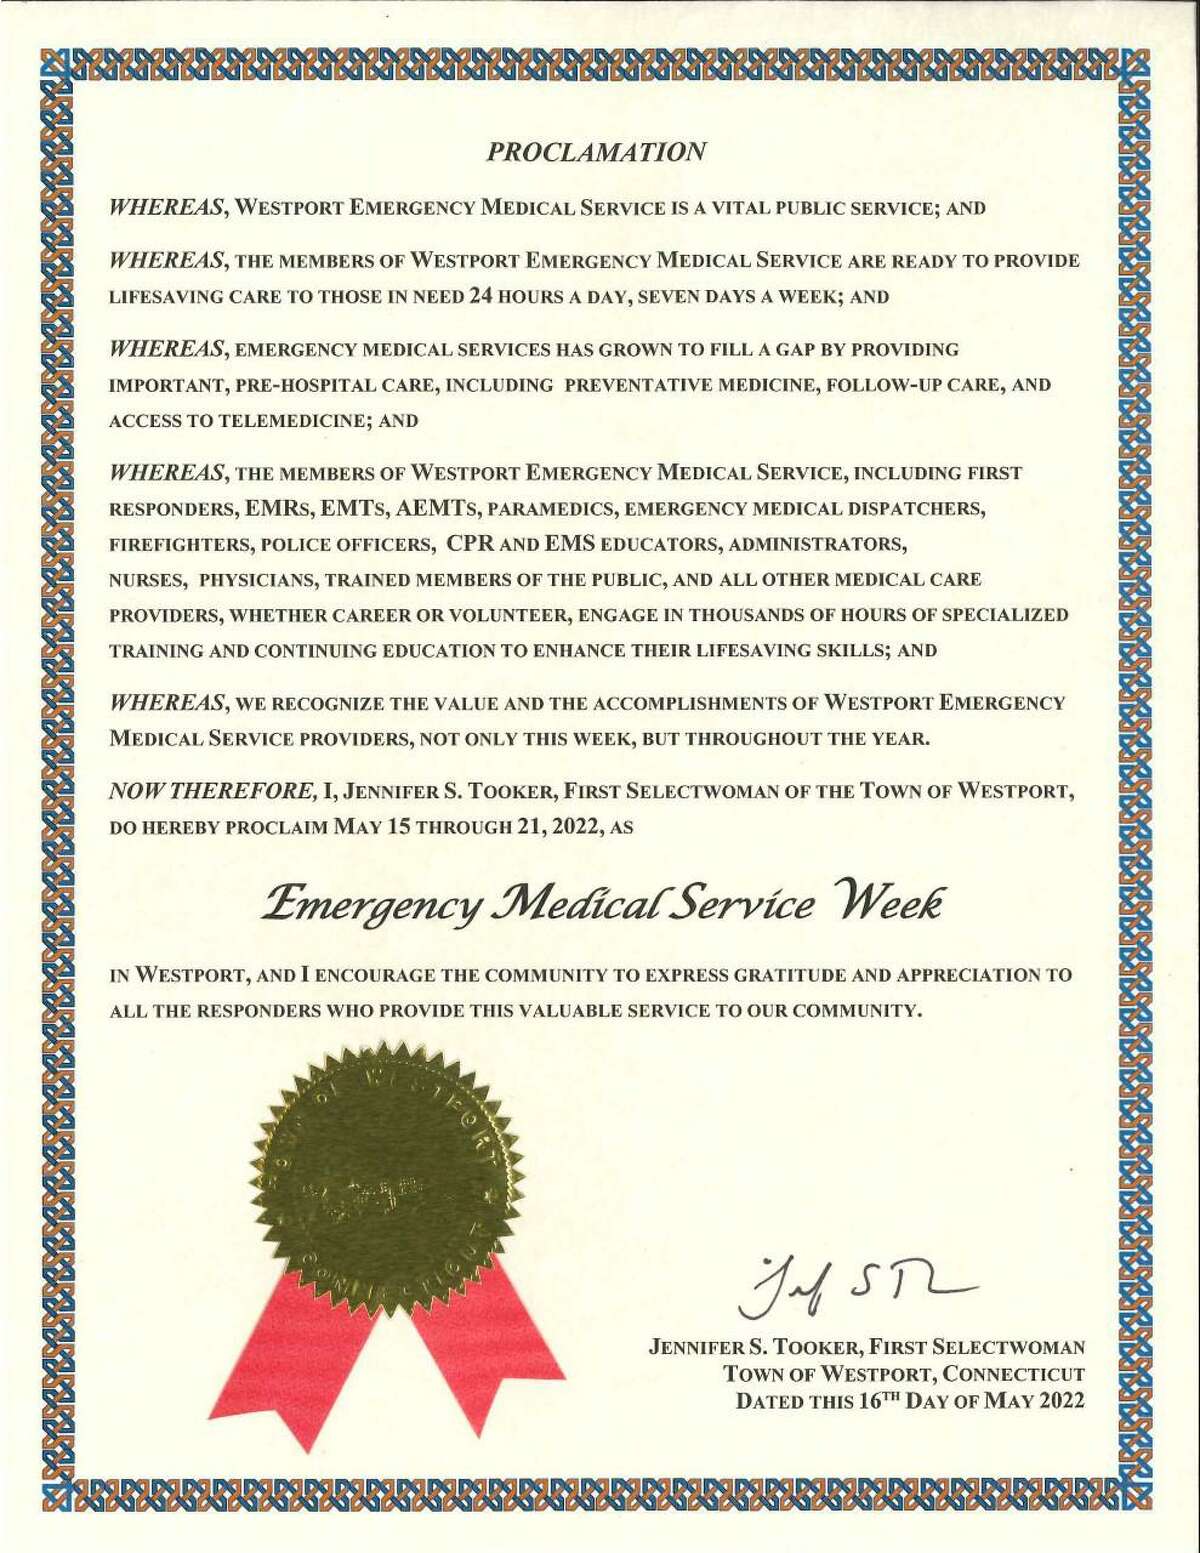 Emergency Medical Services Week: Rising to the Challenge in Westport has been from May 15 and continues through Saturday.  Westport First Selectwoman Jennifer Tooker recently, May 16, issued a proclamation for the observance, with a photo of a copy of the proclamation shown.